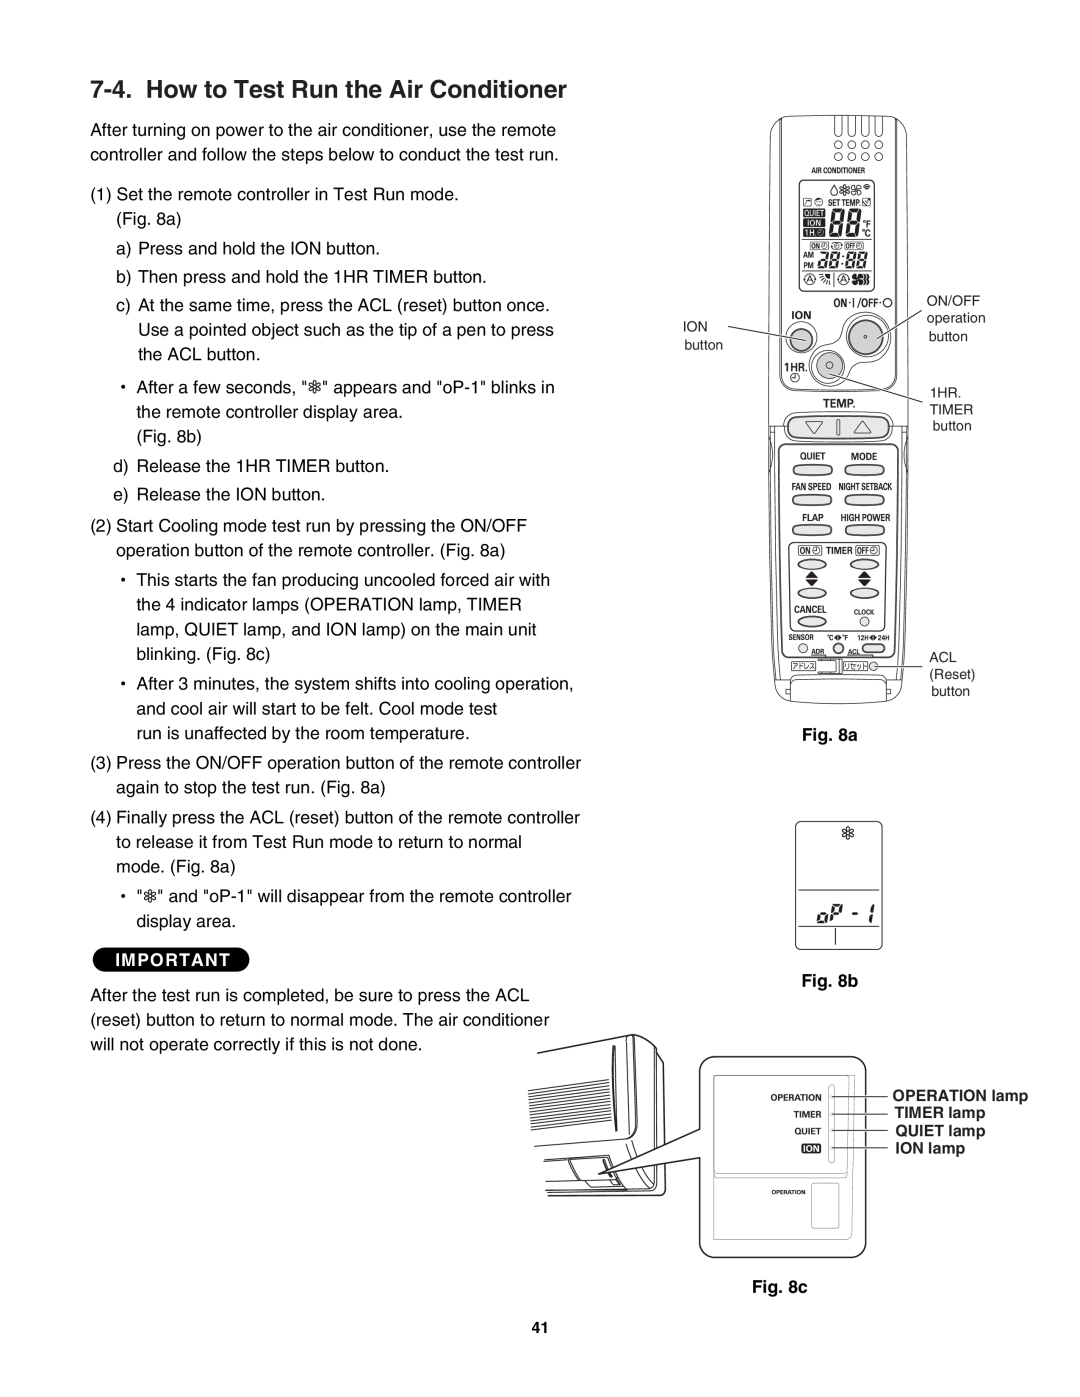 Sanyo C1872, C2472, CL2472, CL1872 service manual How to Test Run the Air Conditioner, a b 